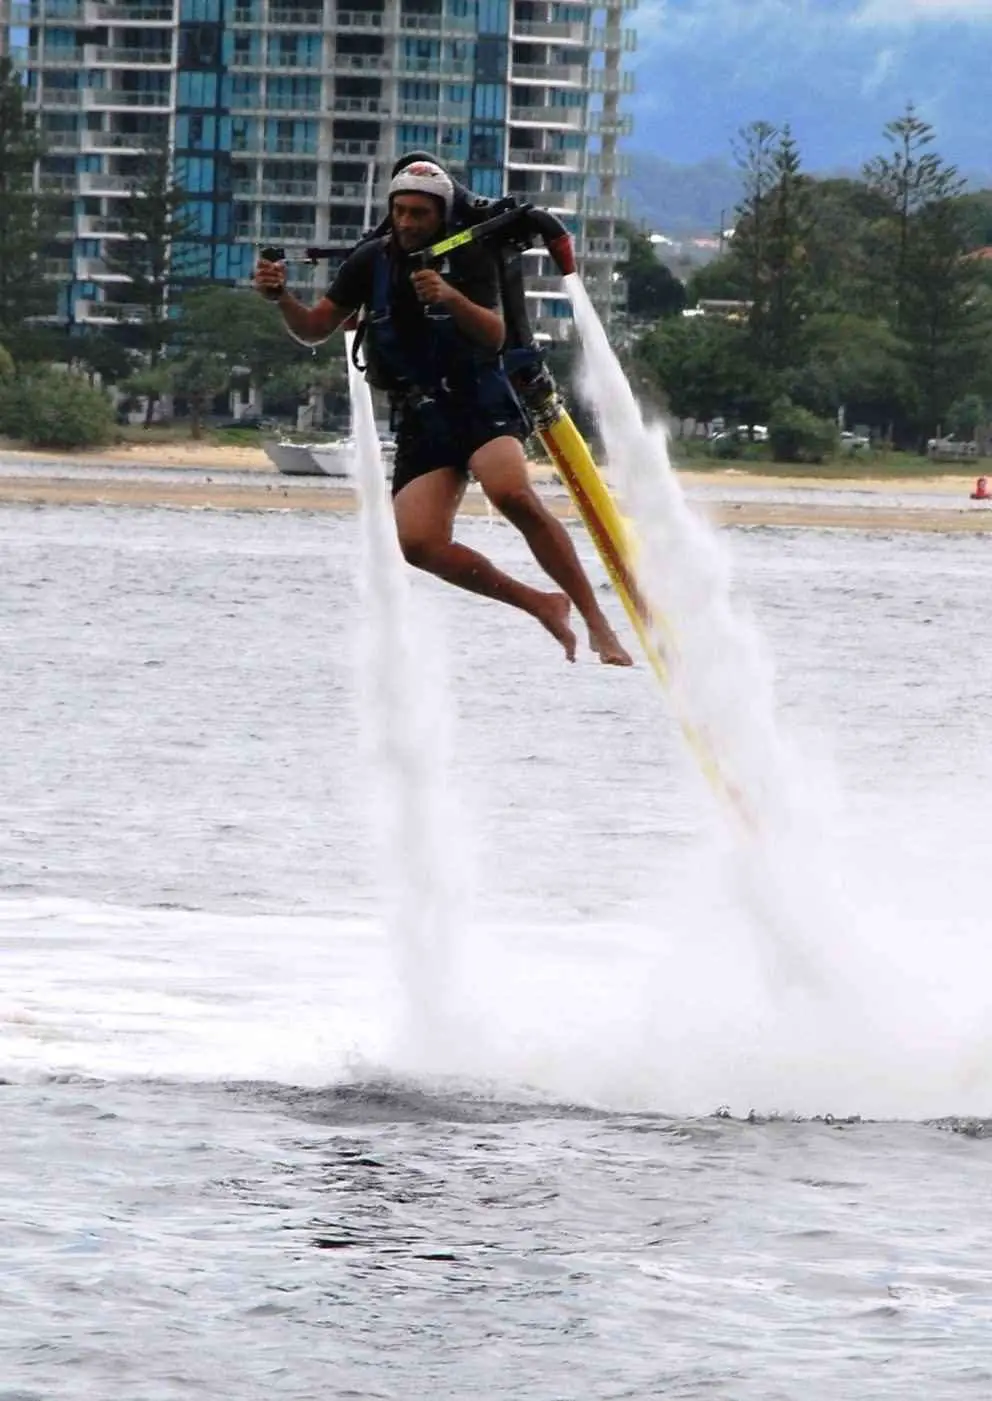 Jetpacks In Australia E1520767460392 | Australia Travel Blog | How To Ride A Jet Pack And Flyboard On Water. Looking Like A Complete Goose, Thanks To Tripadvisor Attractions! | Australia, Flyboarding, Gold Coast, Jet Pack Water, Things To Do, Tripadvisor | Author: Anthony Bianco - The Travel Tart Blog